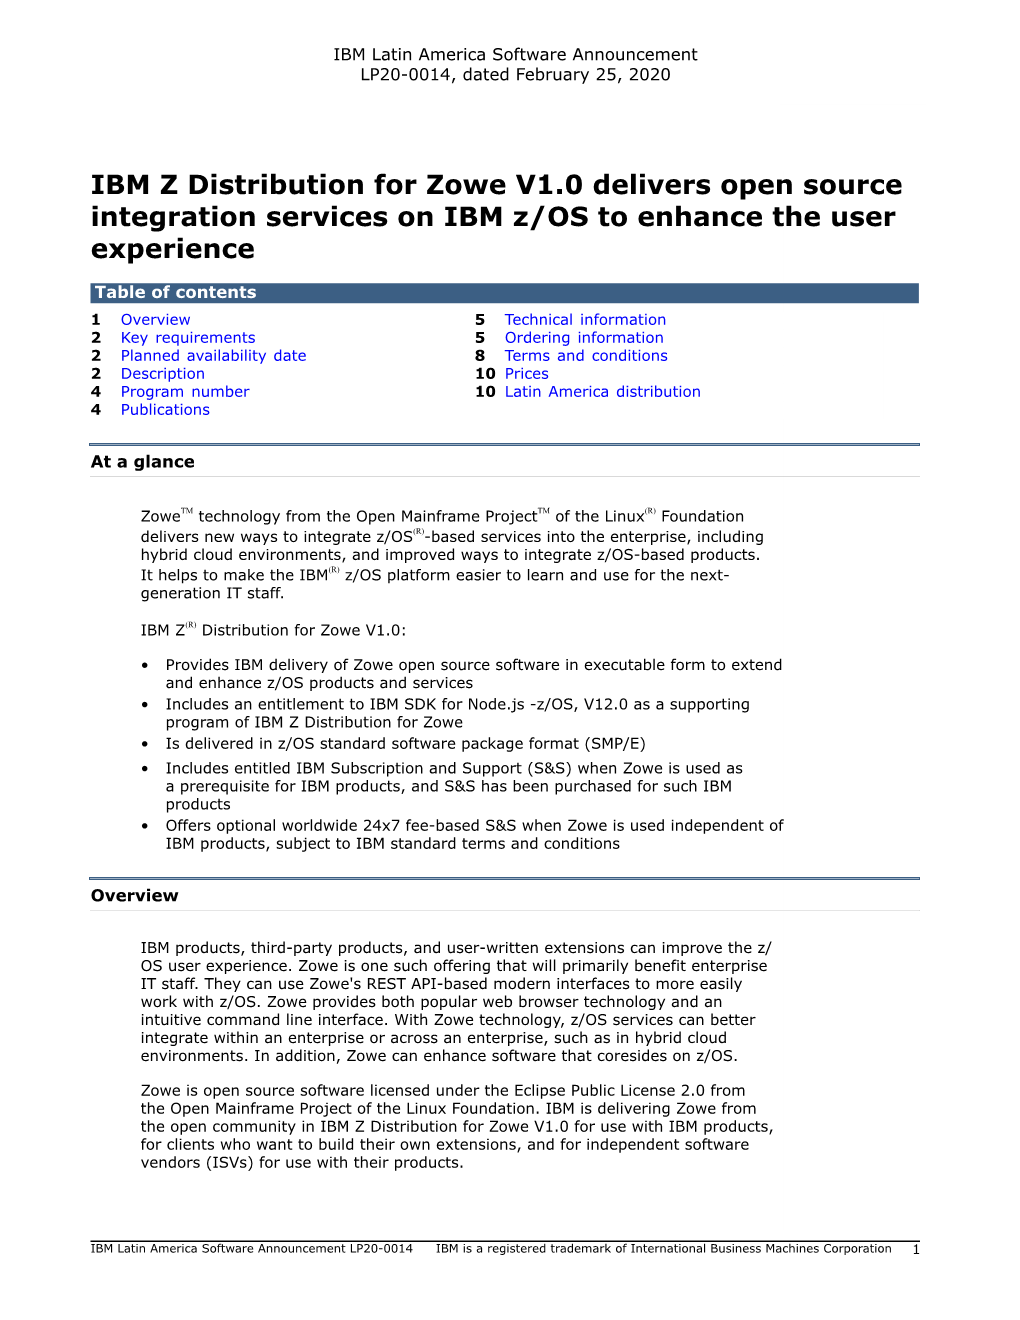 IBM Z Distribution for Zowe V1.0 Delivers Open Source Integration Services on IBM Z/OS to Enhance the User Experience